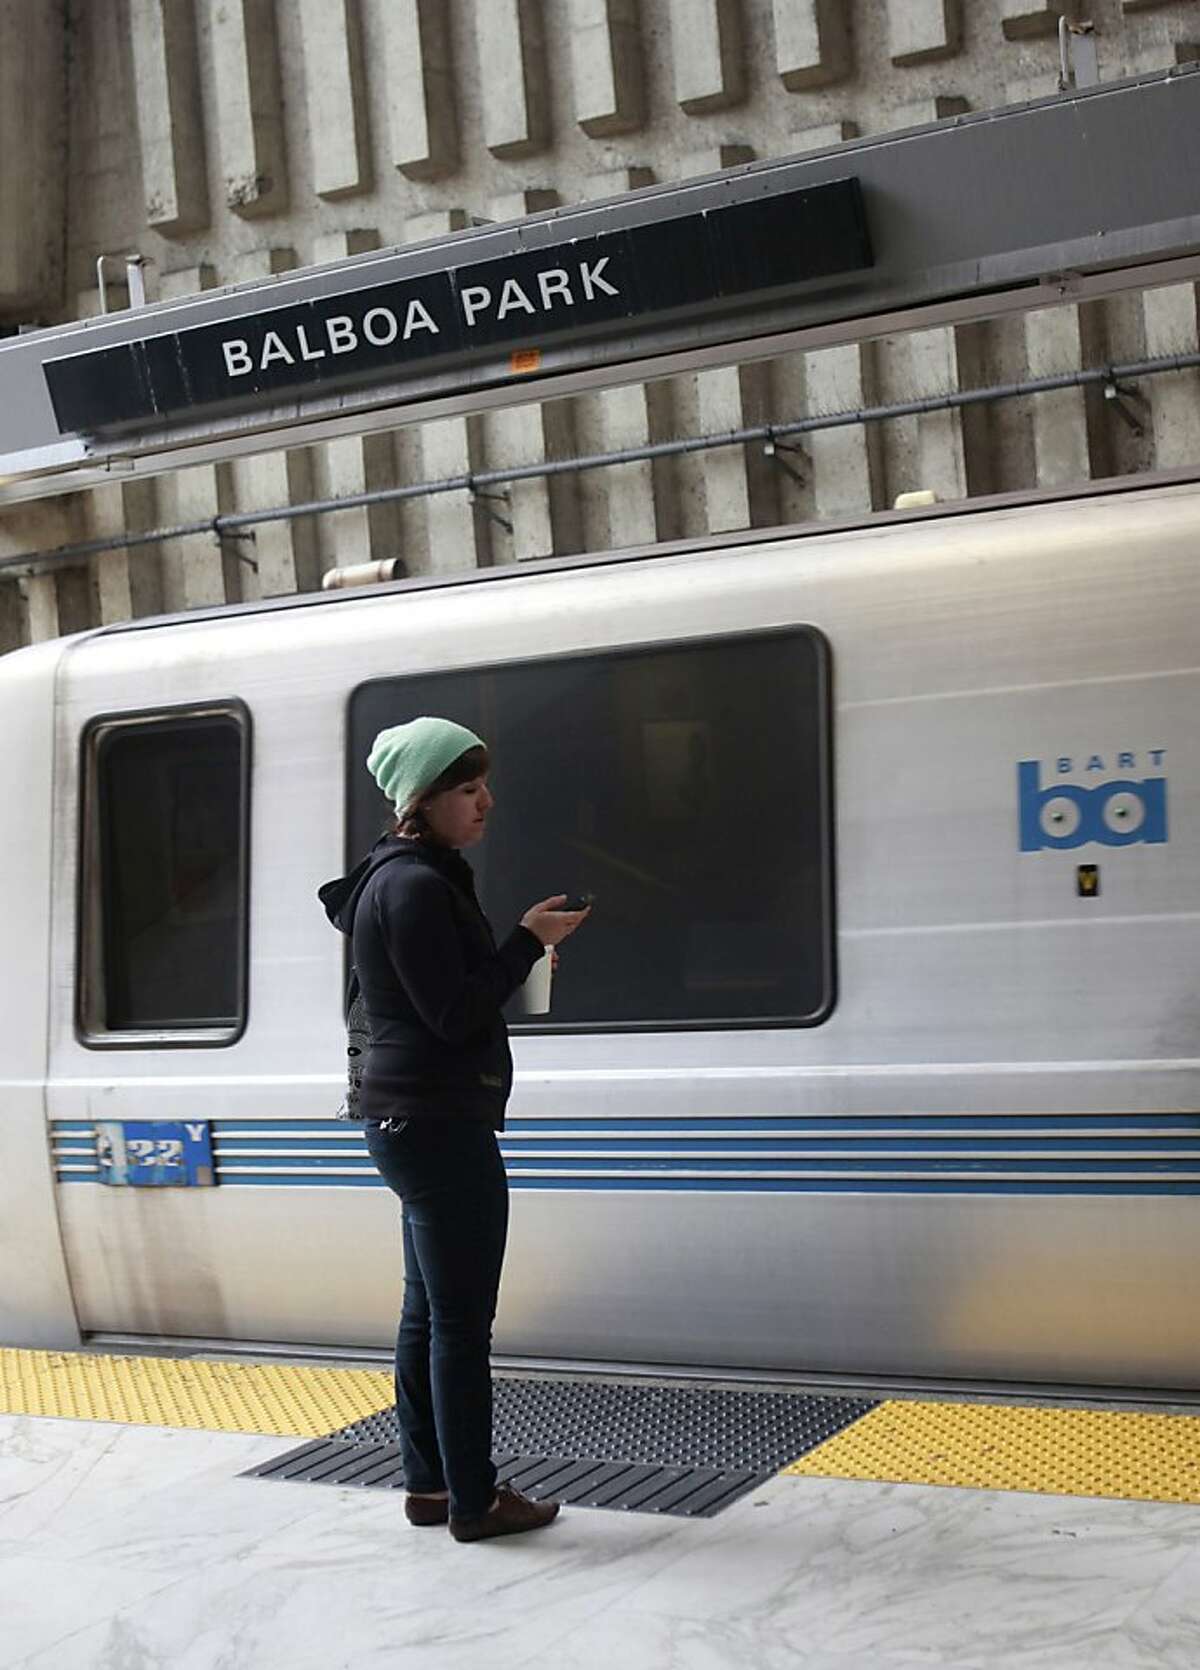 A BART rider looks at her phone before getting on BART at the Balboa Park Station in San Francisco, Calif., Tuesday May 15th, 2012.